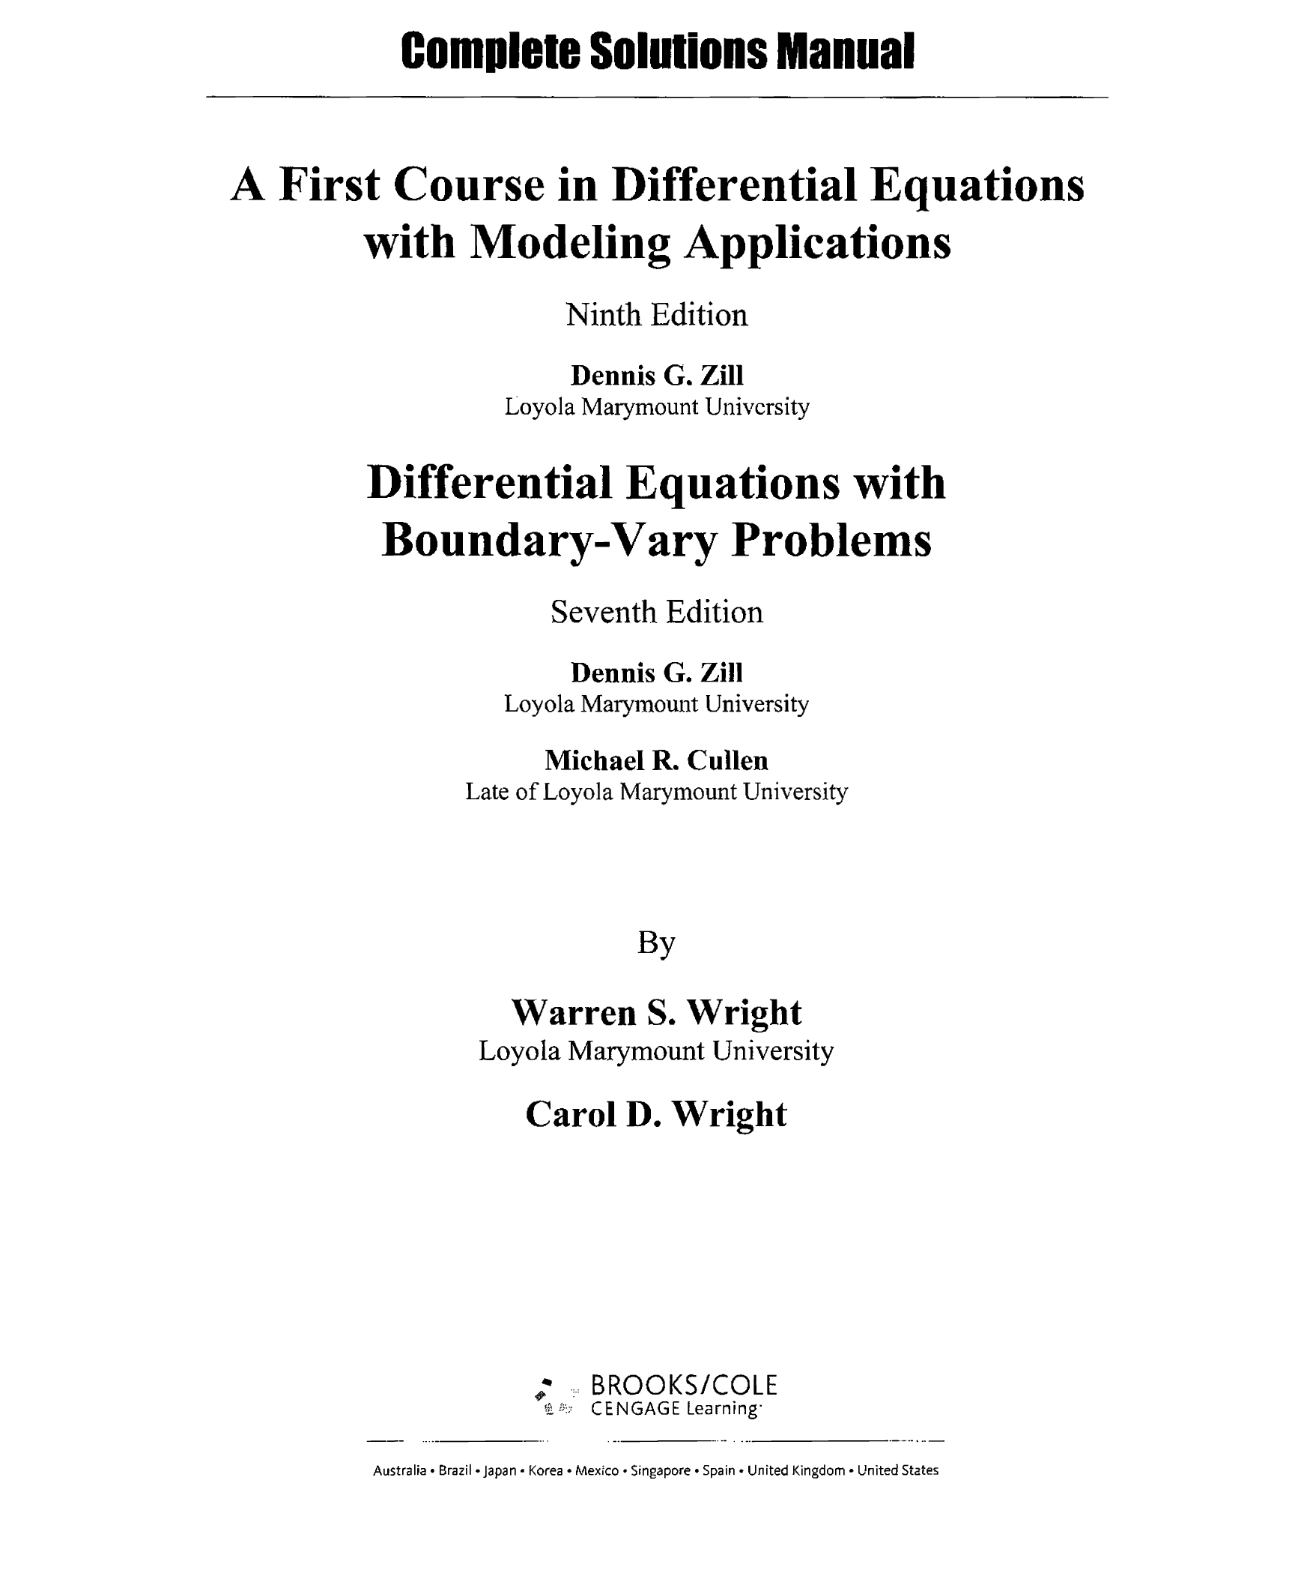 download free a first course in differential equations with modeling applications 9th edition solution manual pdf | Gioumeh solutions